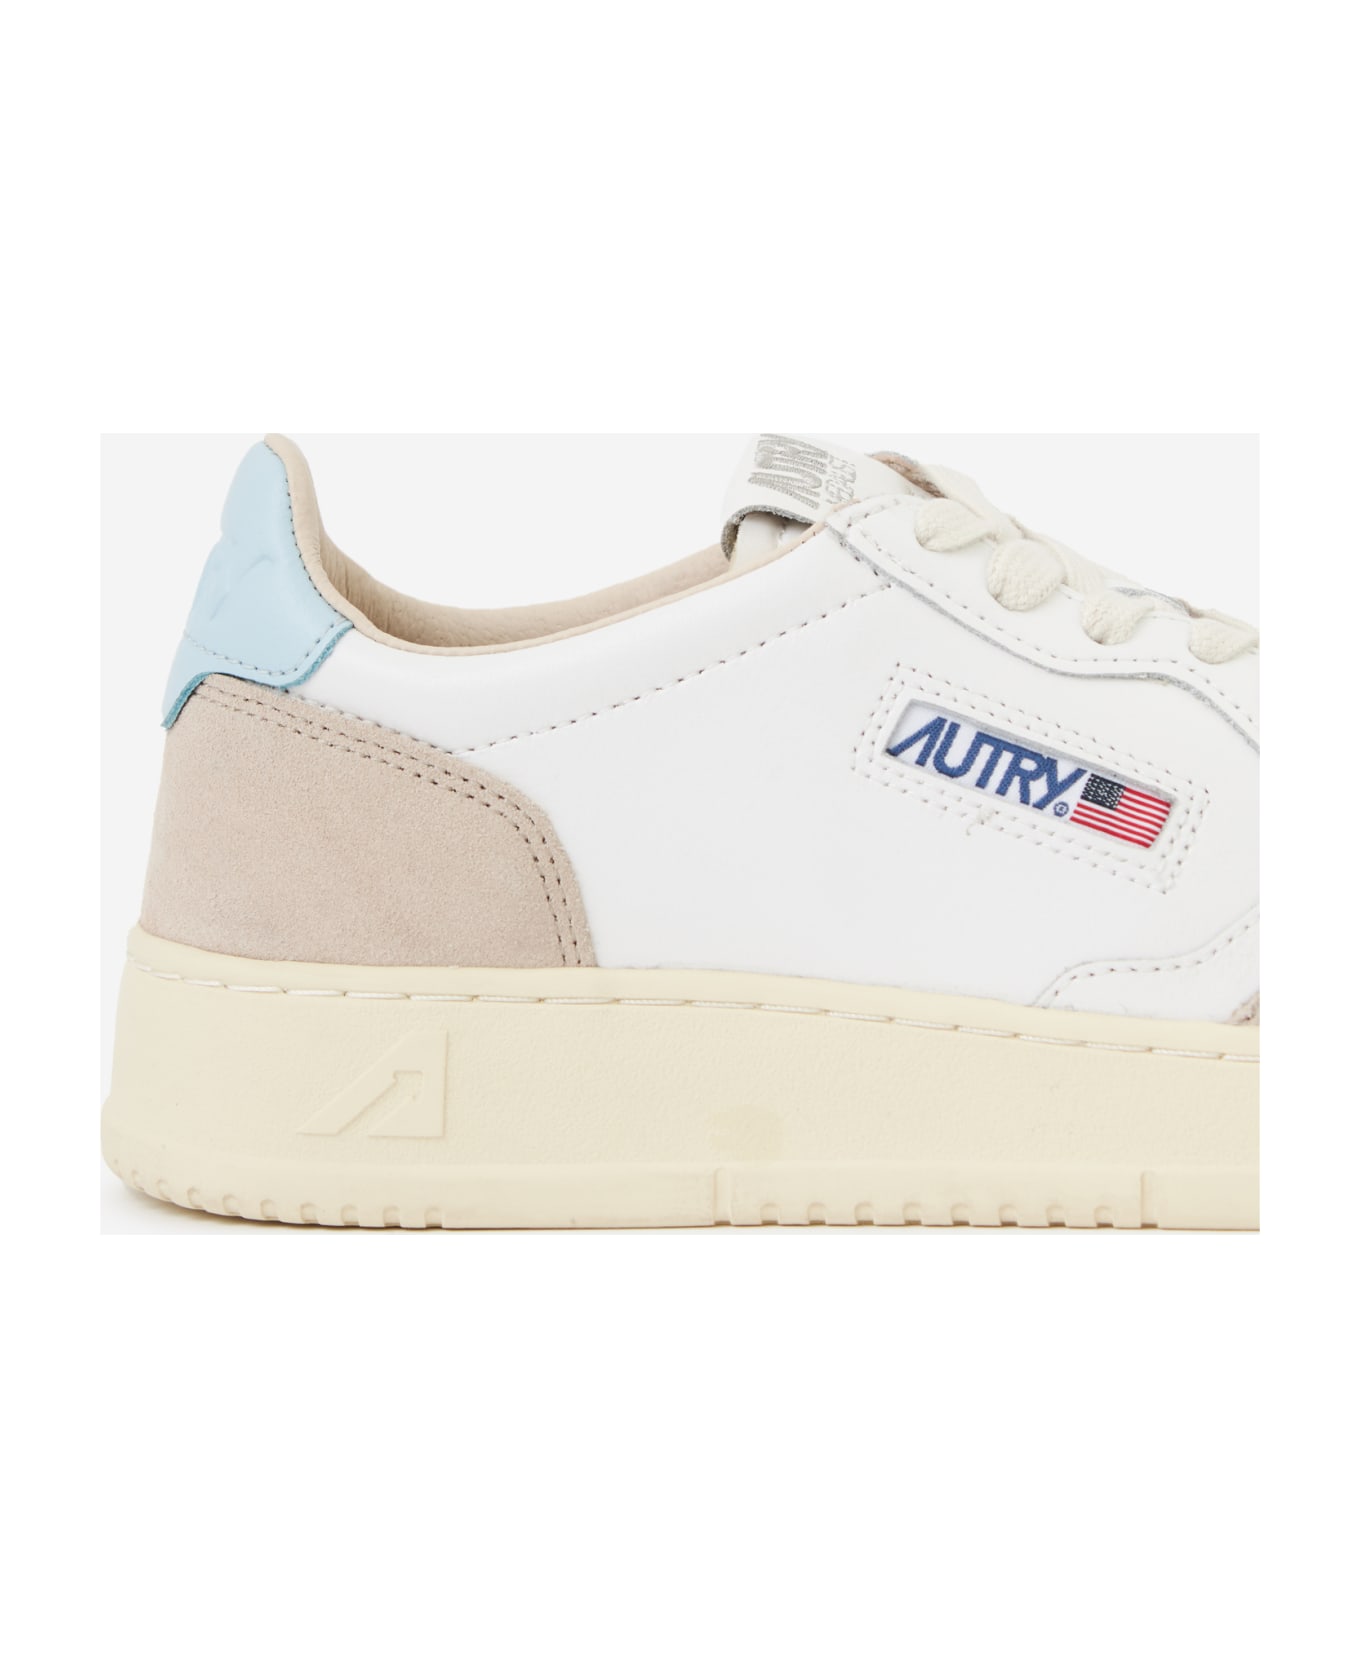 Autry 01 Low Sneakers - white スニーカー